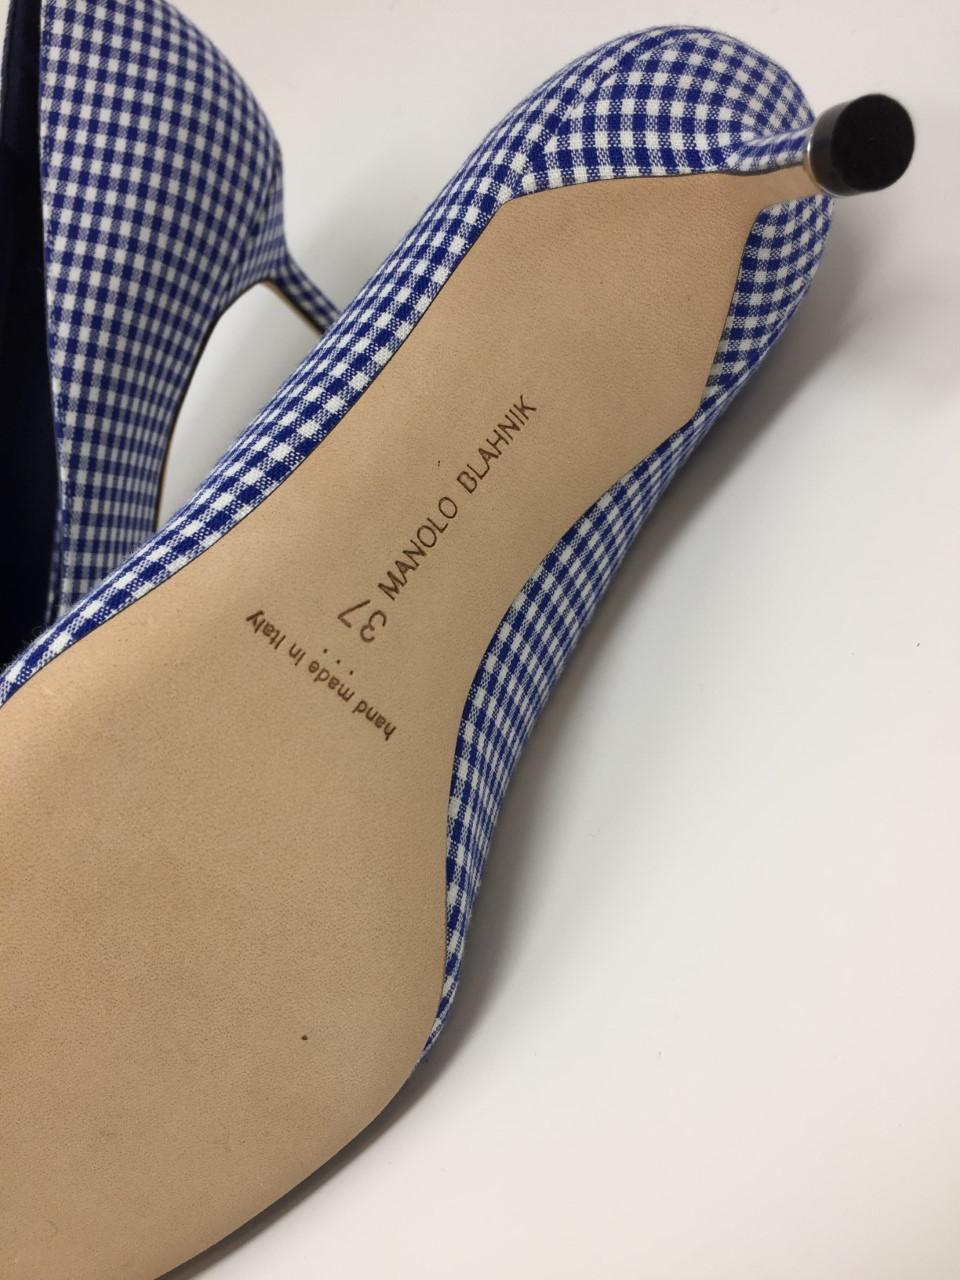 Never been worn 2018 jewel hangisi gingham manolo blahnik pumps in size 37. 
Two dust bags included.
6cm heel.
Sole: 100% leather
Lining: 100% leather
Outer: 100% cotton
Color: Navy and White
